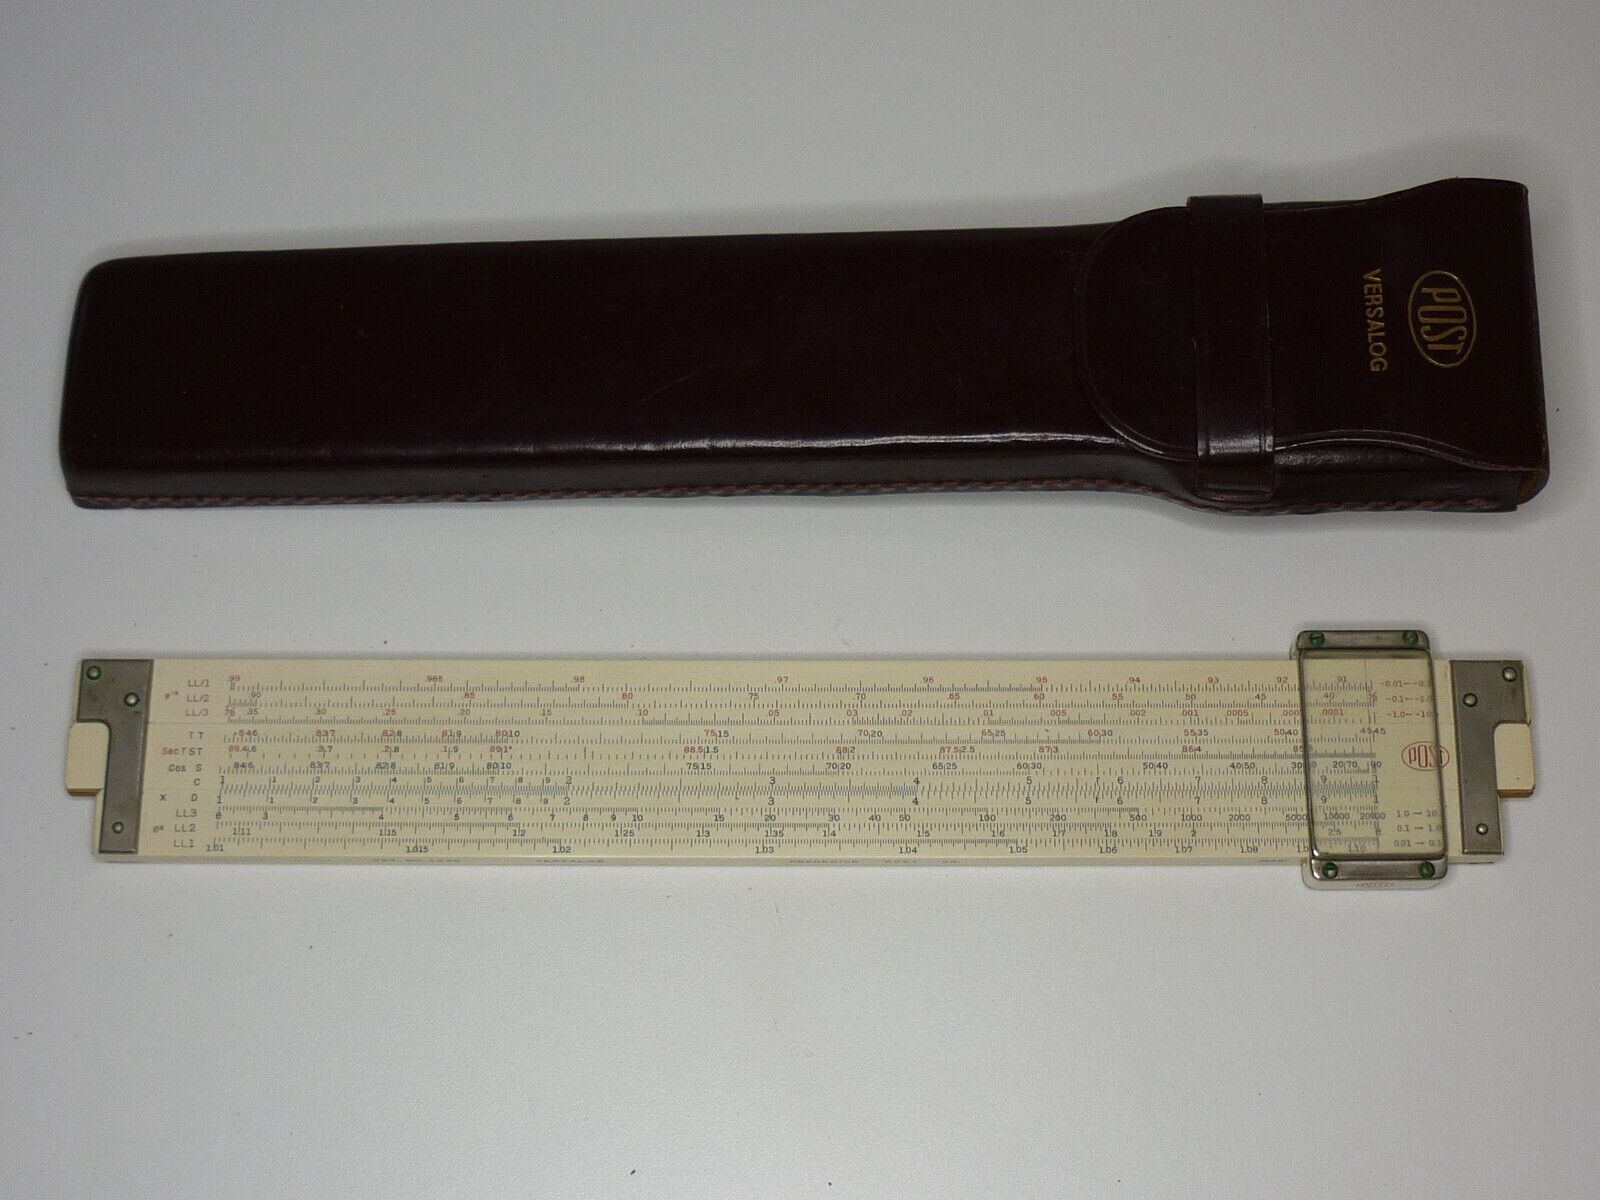 Frederick Post Co. Versalog Hemmi Bamboo Japan FE with Leather Case Slide Rule